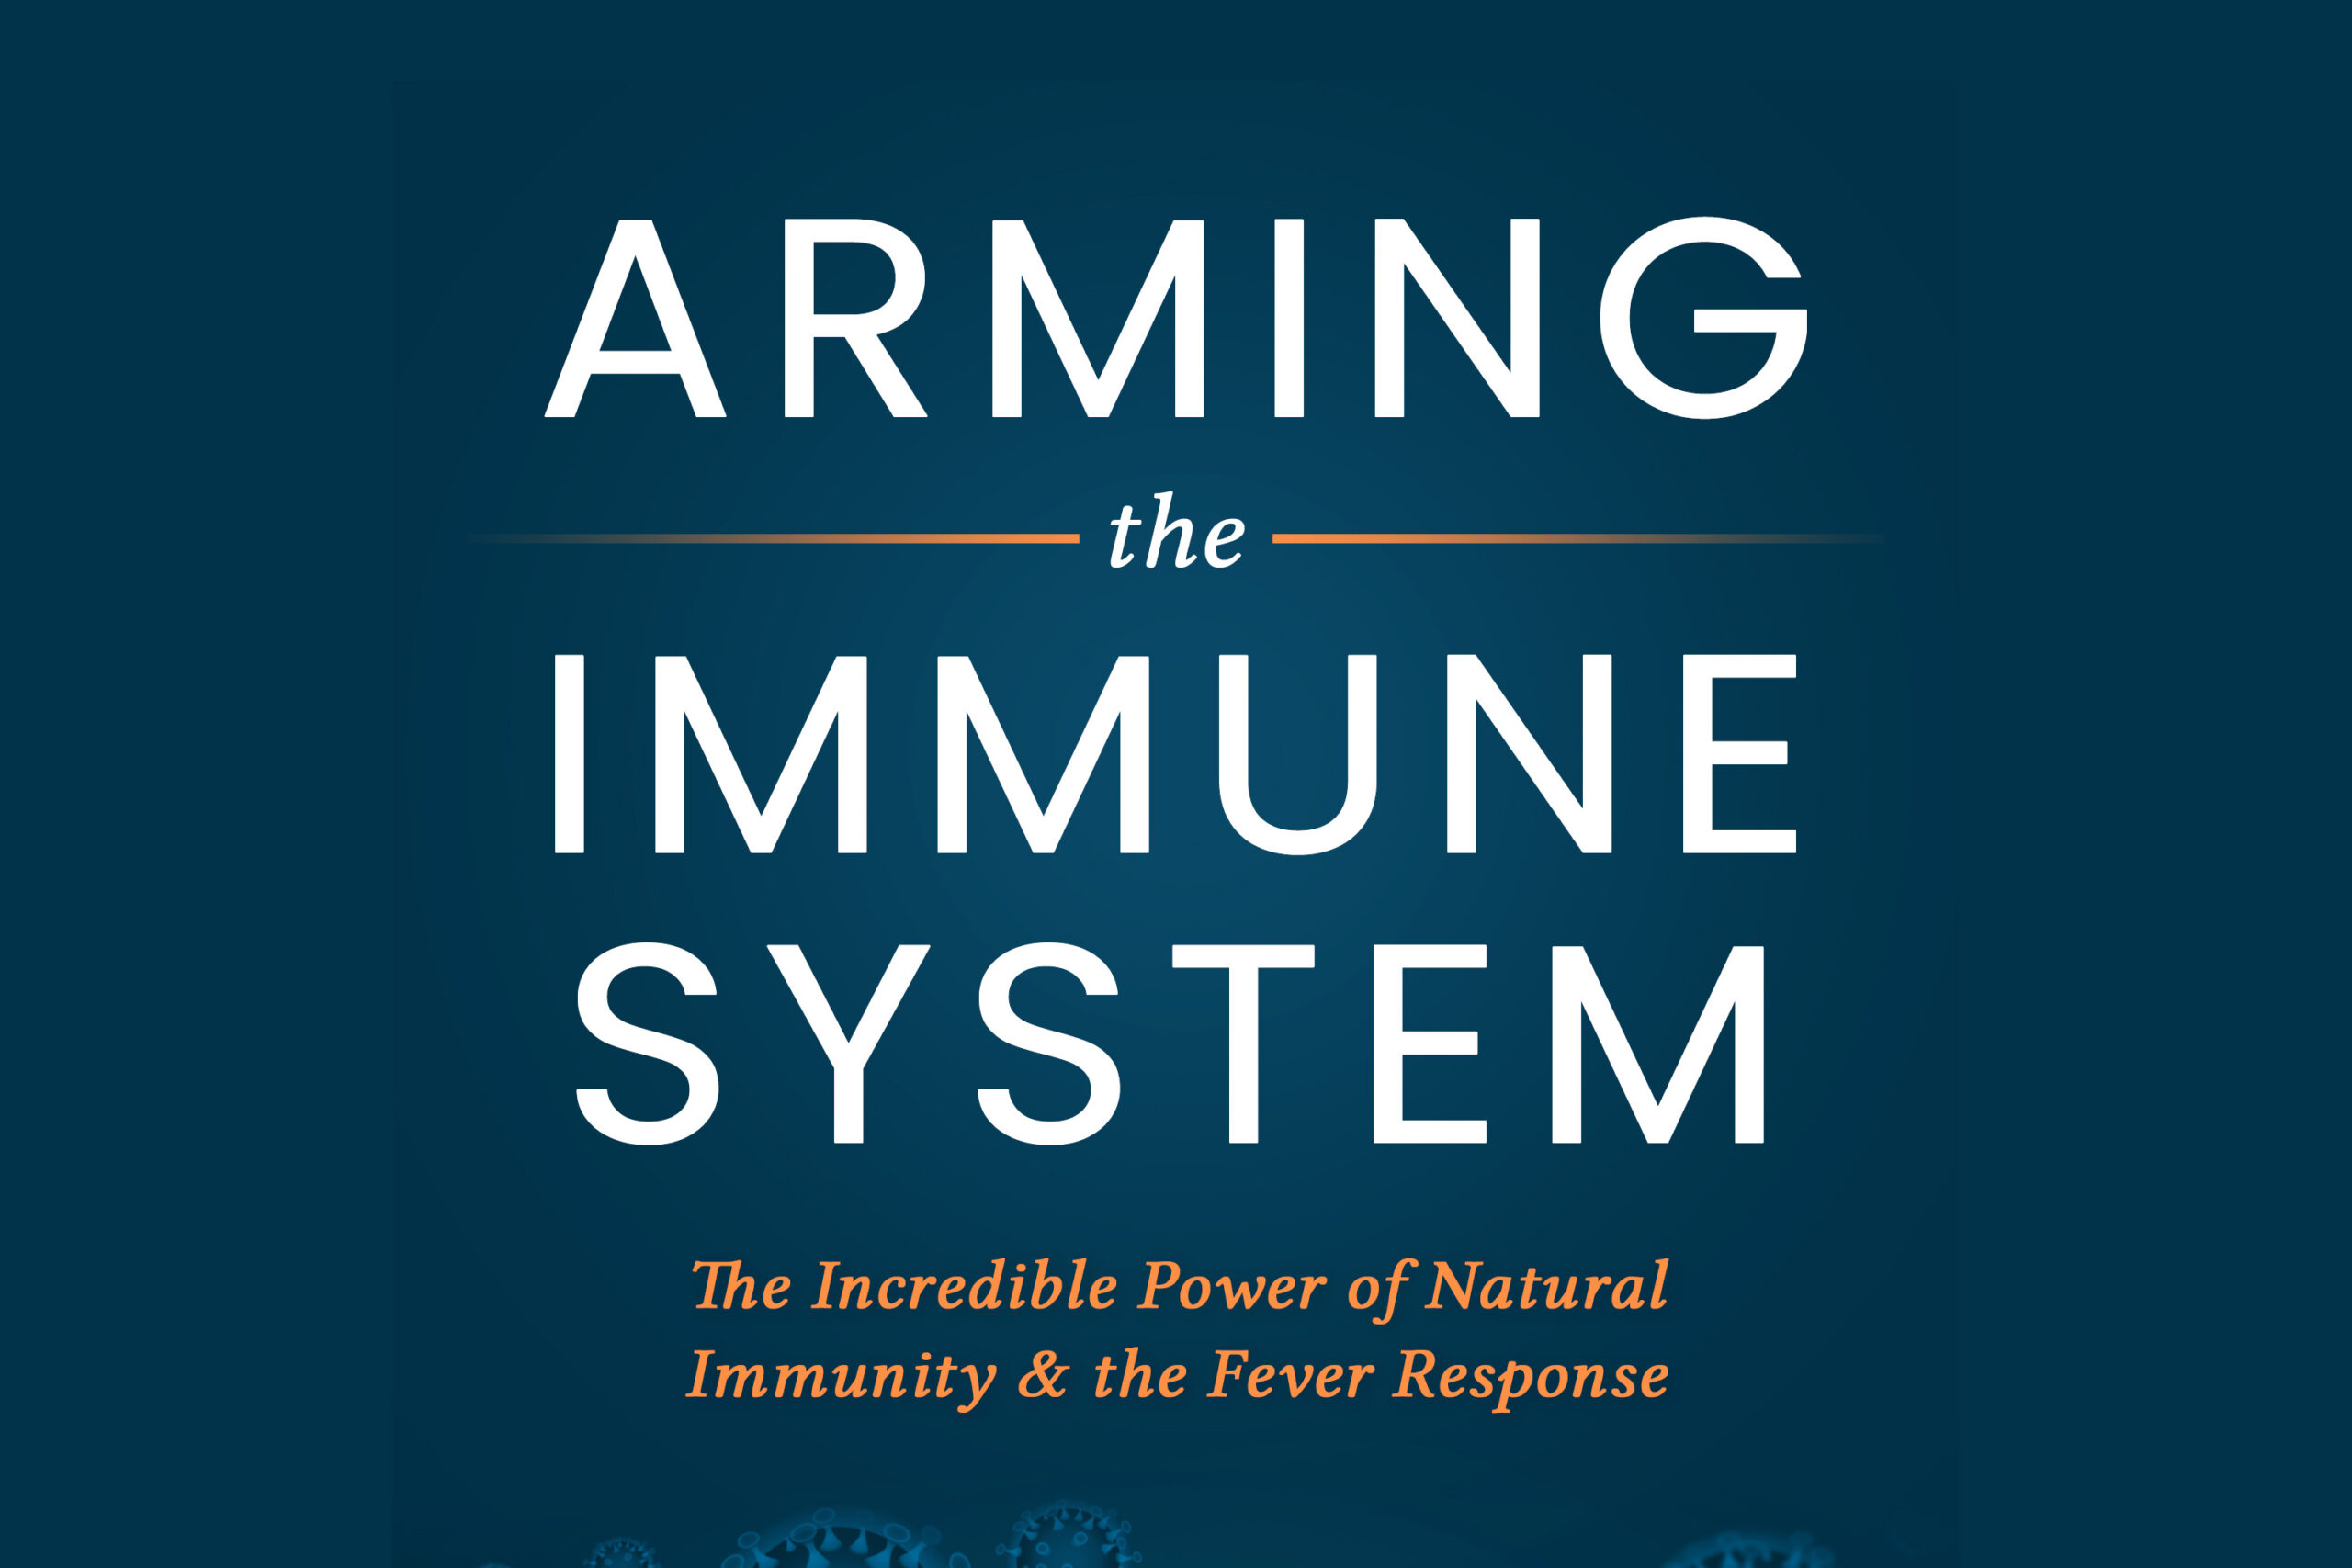 Arming the Immune System